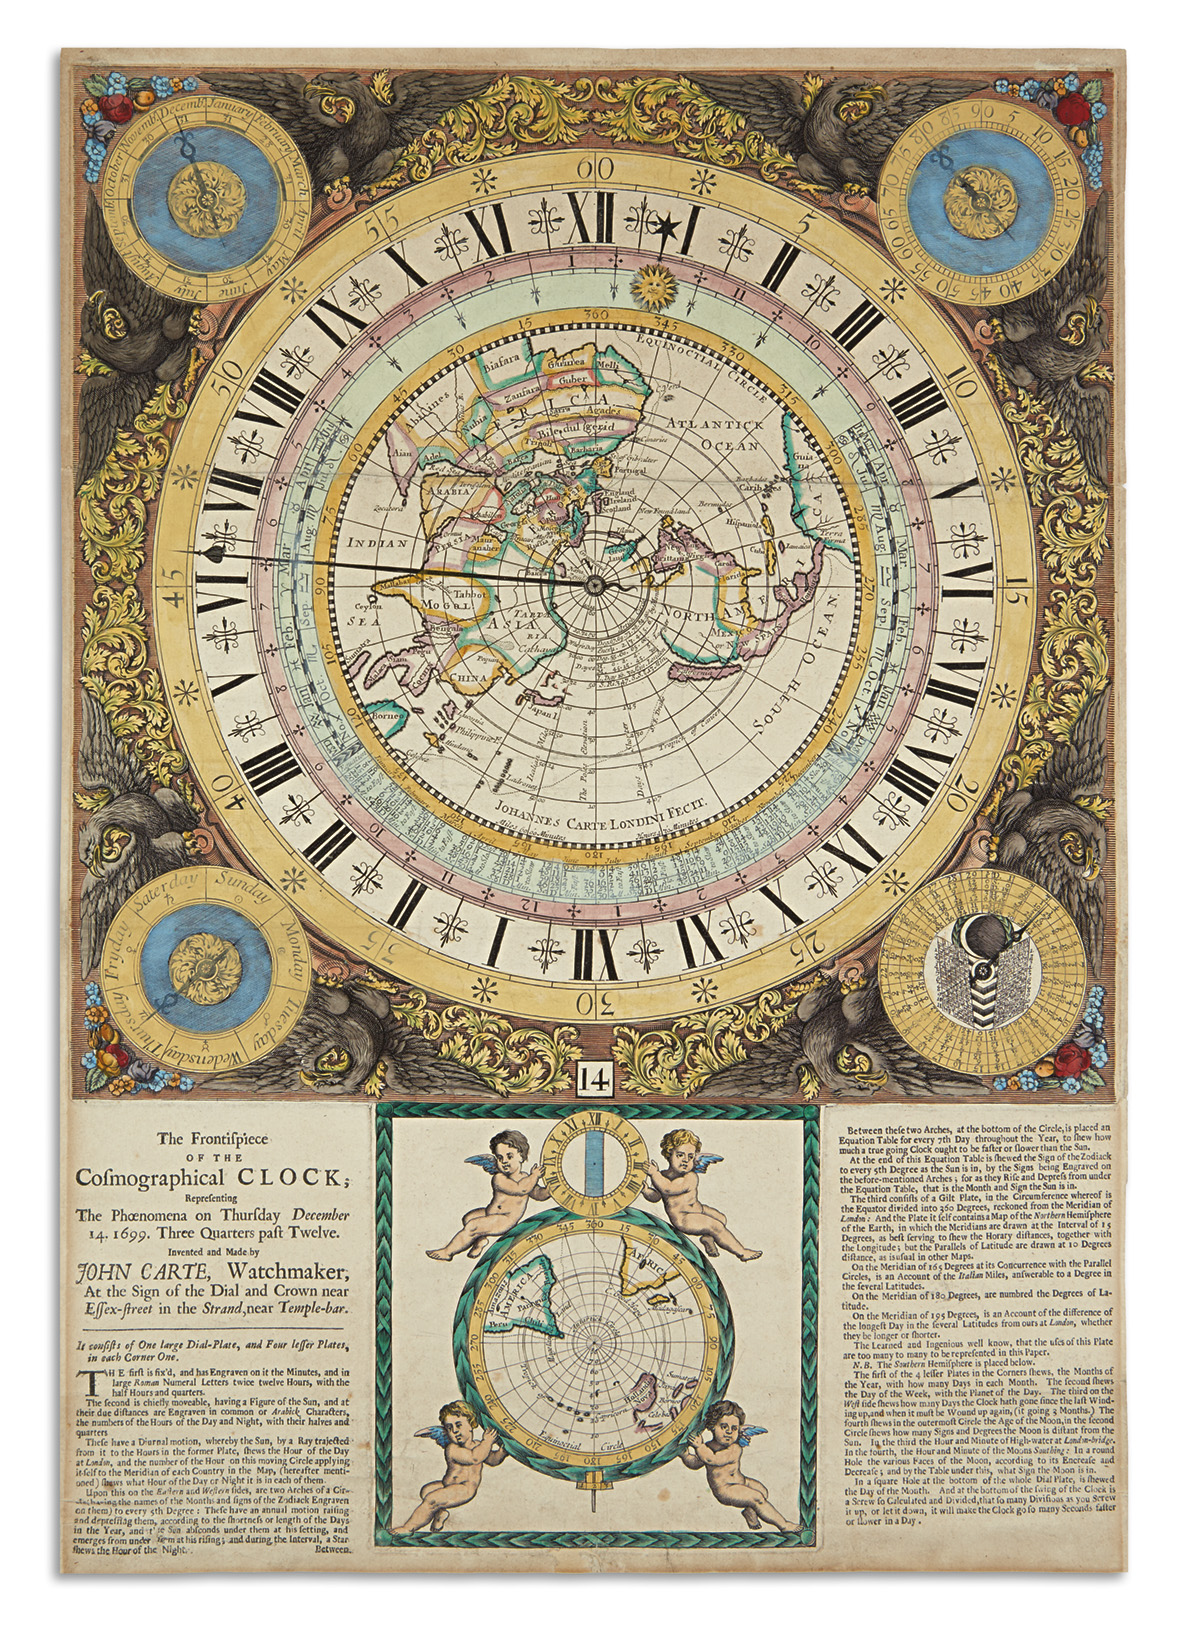 CARTE, JOHN. The Frontispiece of the Cosmographical Clock; Representing the Phoenomena on Thursday December 14, 1699.